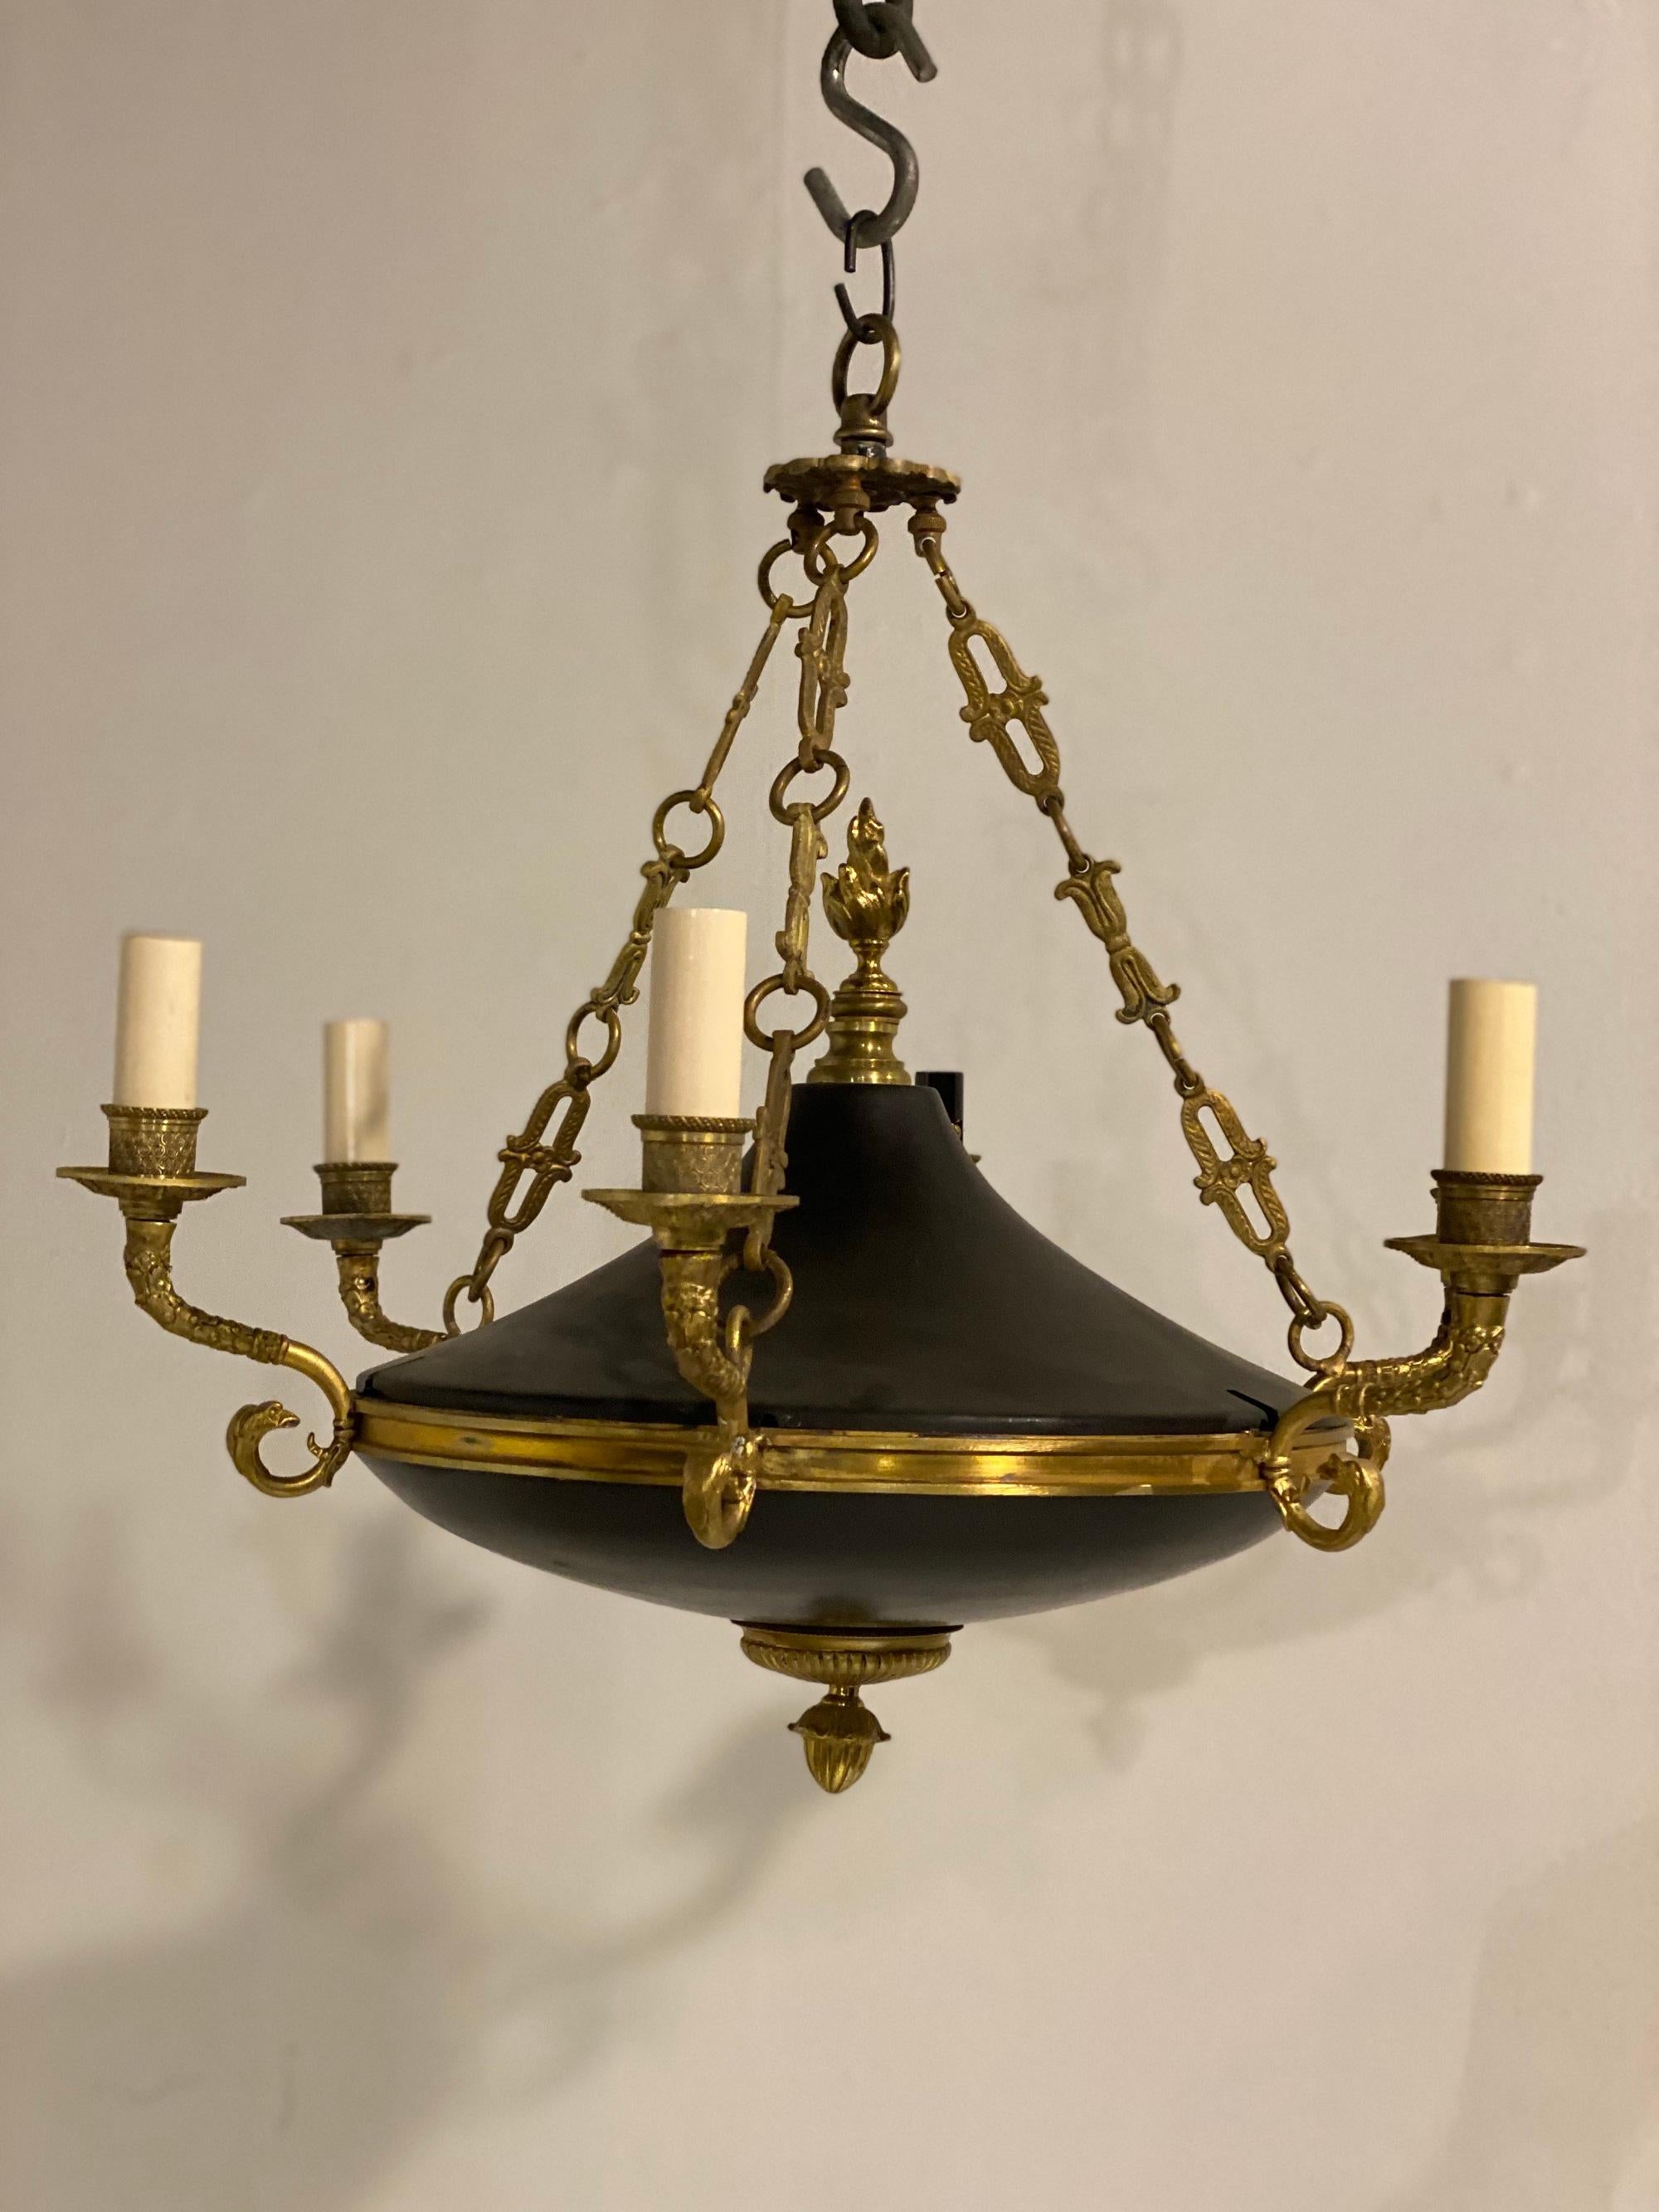 A 1900 French empire style chandelier with eagle heads for 6 lights 